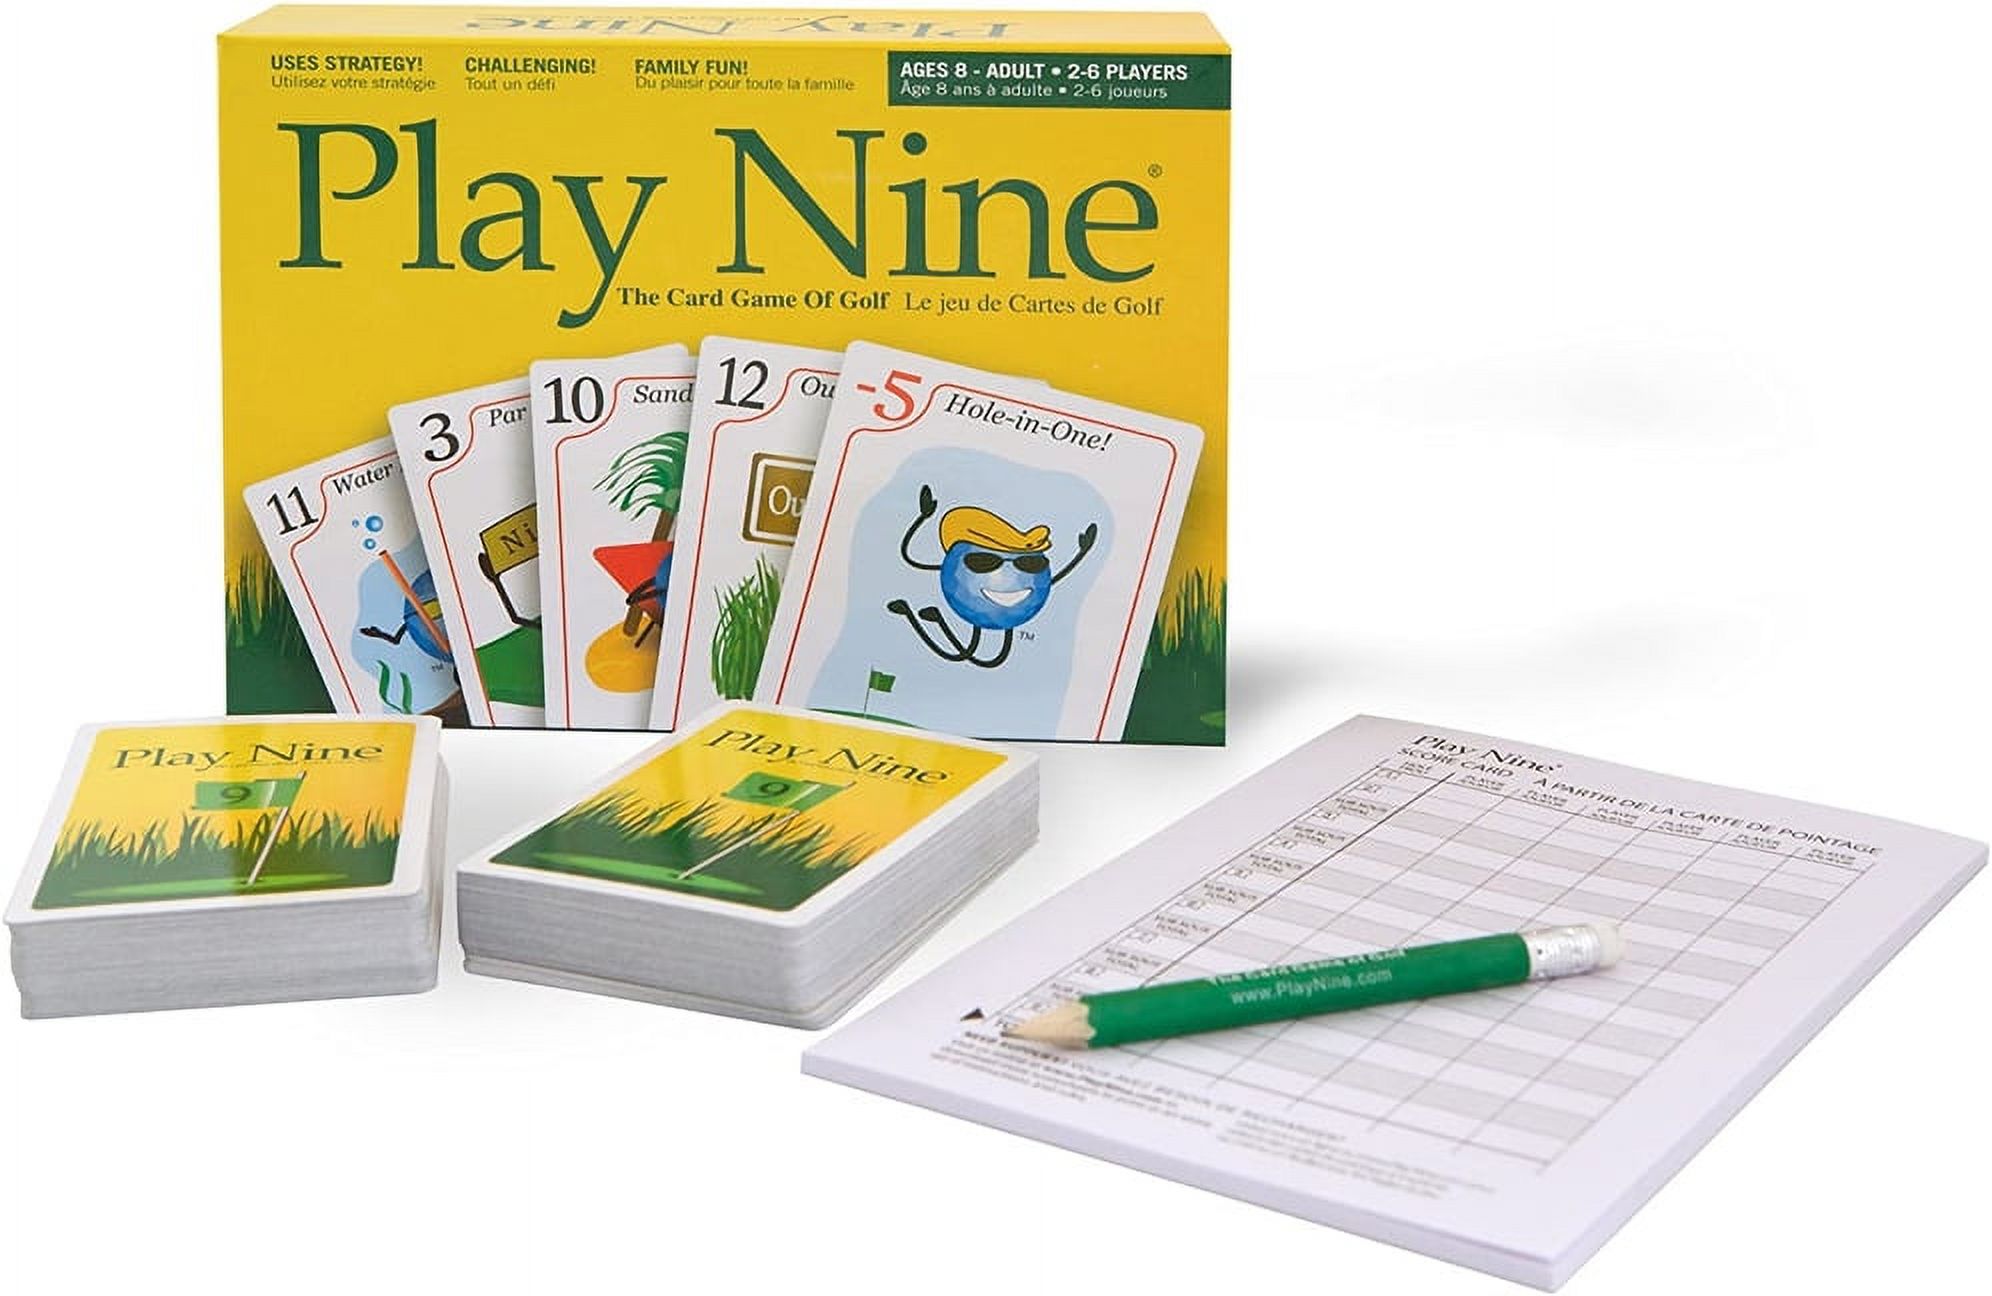 Play Nine The Card Game of Golf New in Box Sealed Great family fun - image 1 of 8